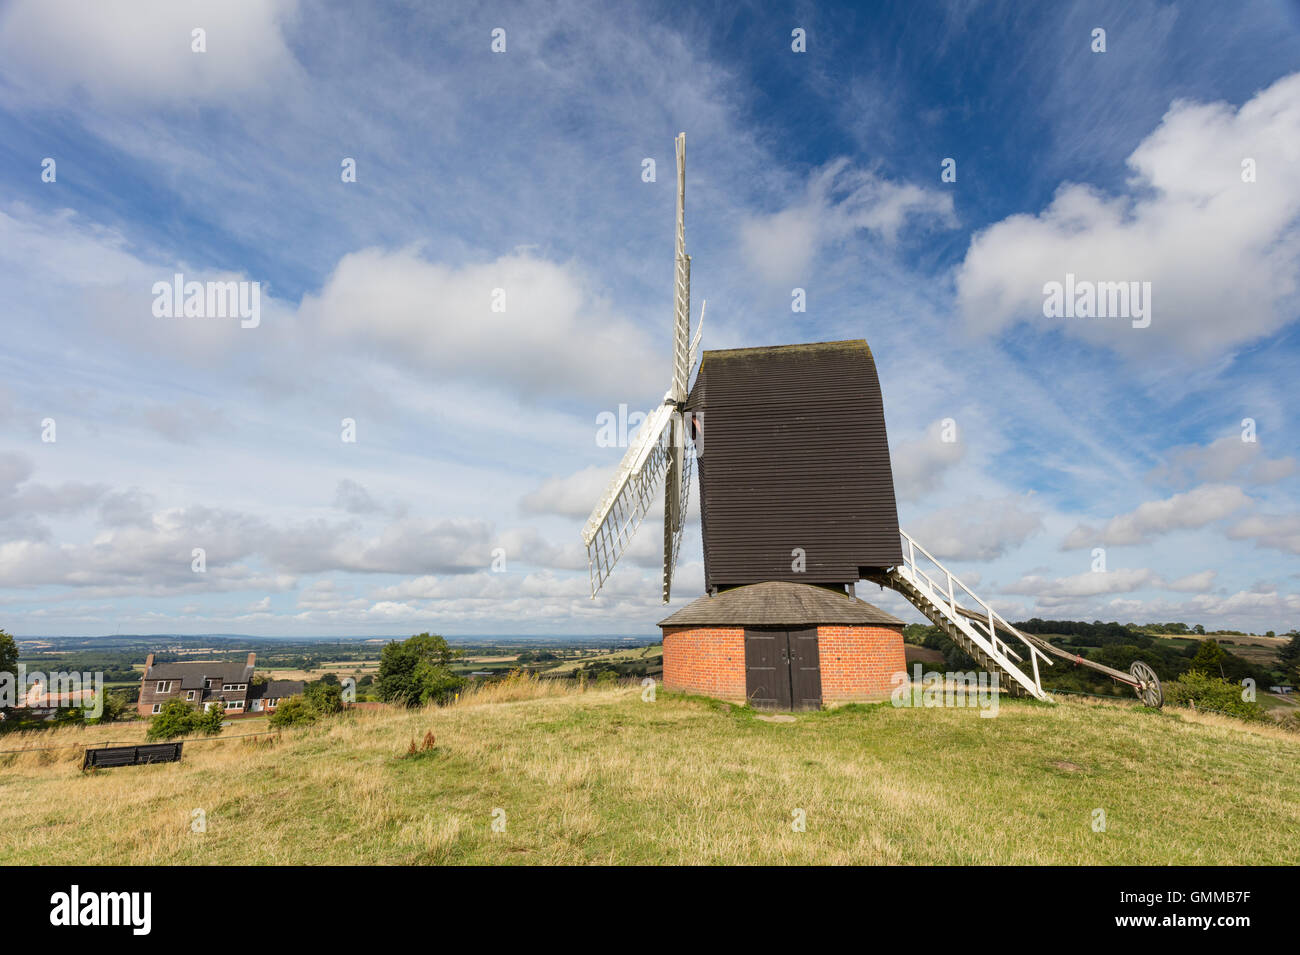 Brill windmill, a post windmill situated on Brill Common, Aylesbury, Buckingham. It was in use from 1668 to 1906. Stock Photo